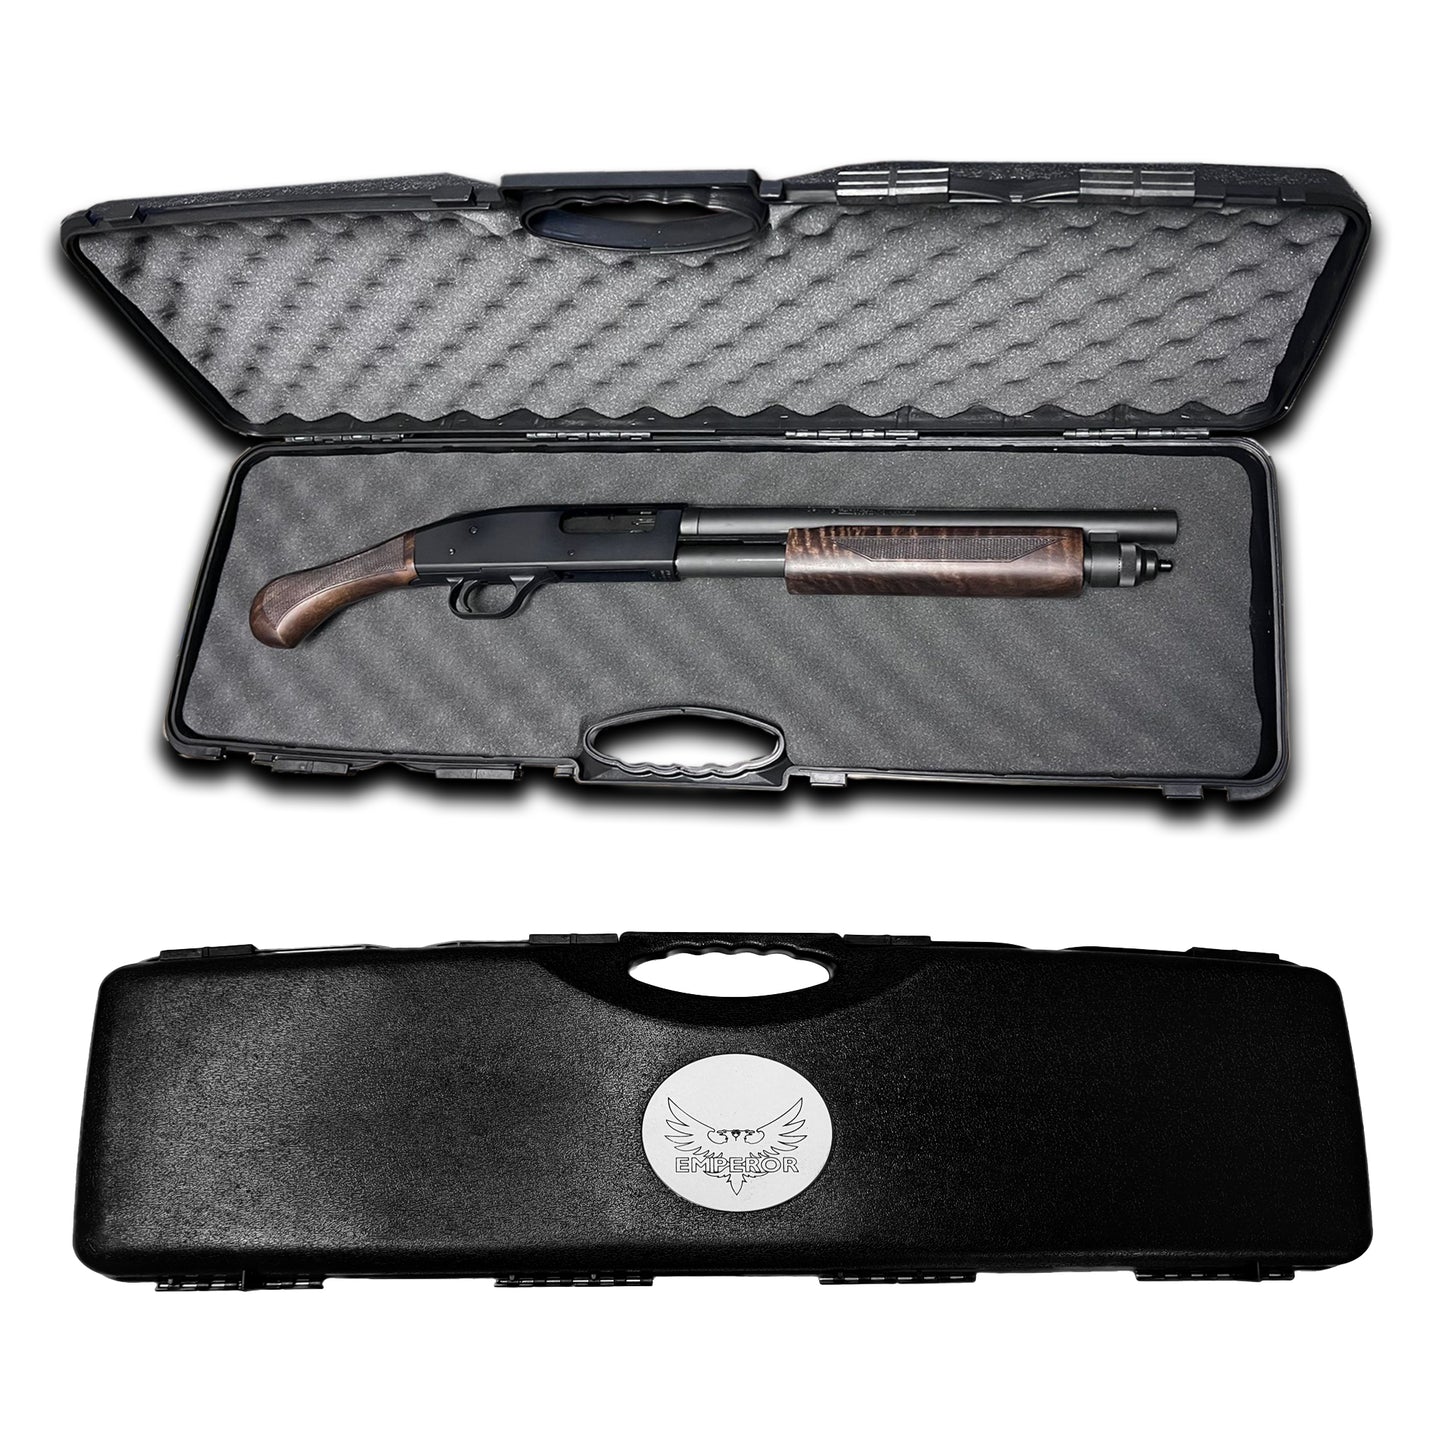 Emperor Single Scope Hard Plastic Rifle Case with Foam | 31.25" x 10" x 3" Scratch and Water Resistant Storage Case - Dual Layers of Soft Egg Crate Foam